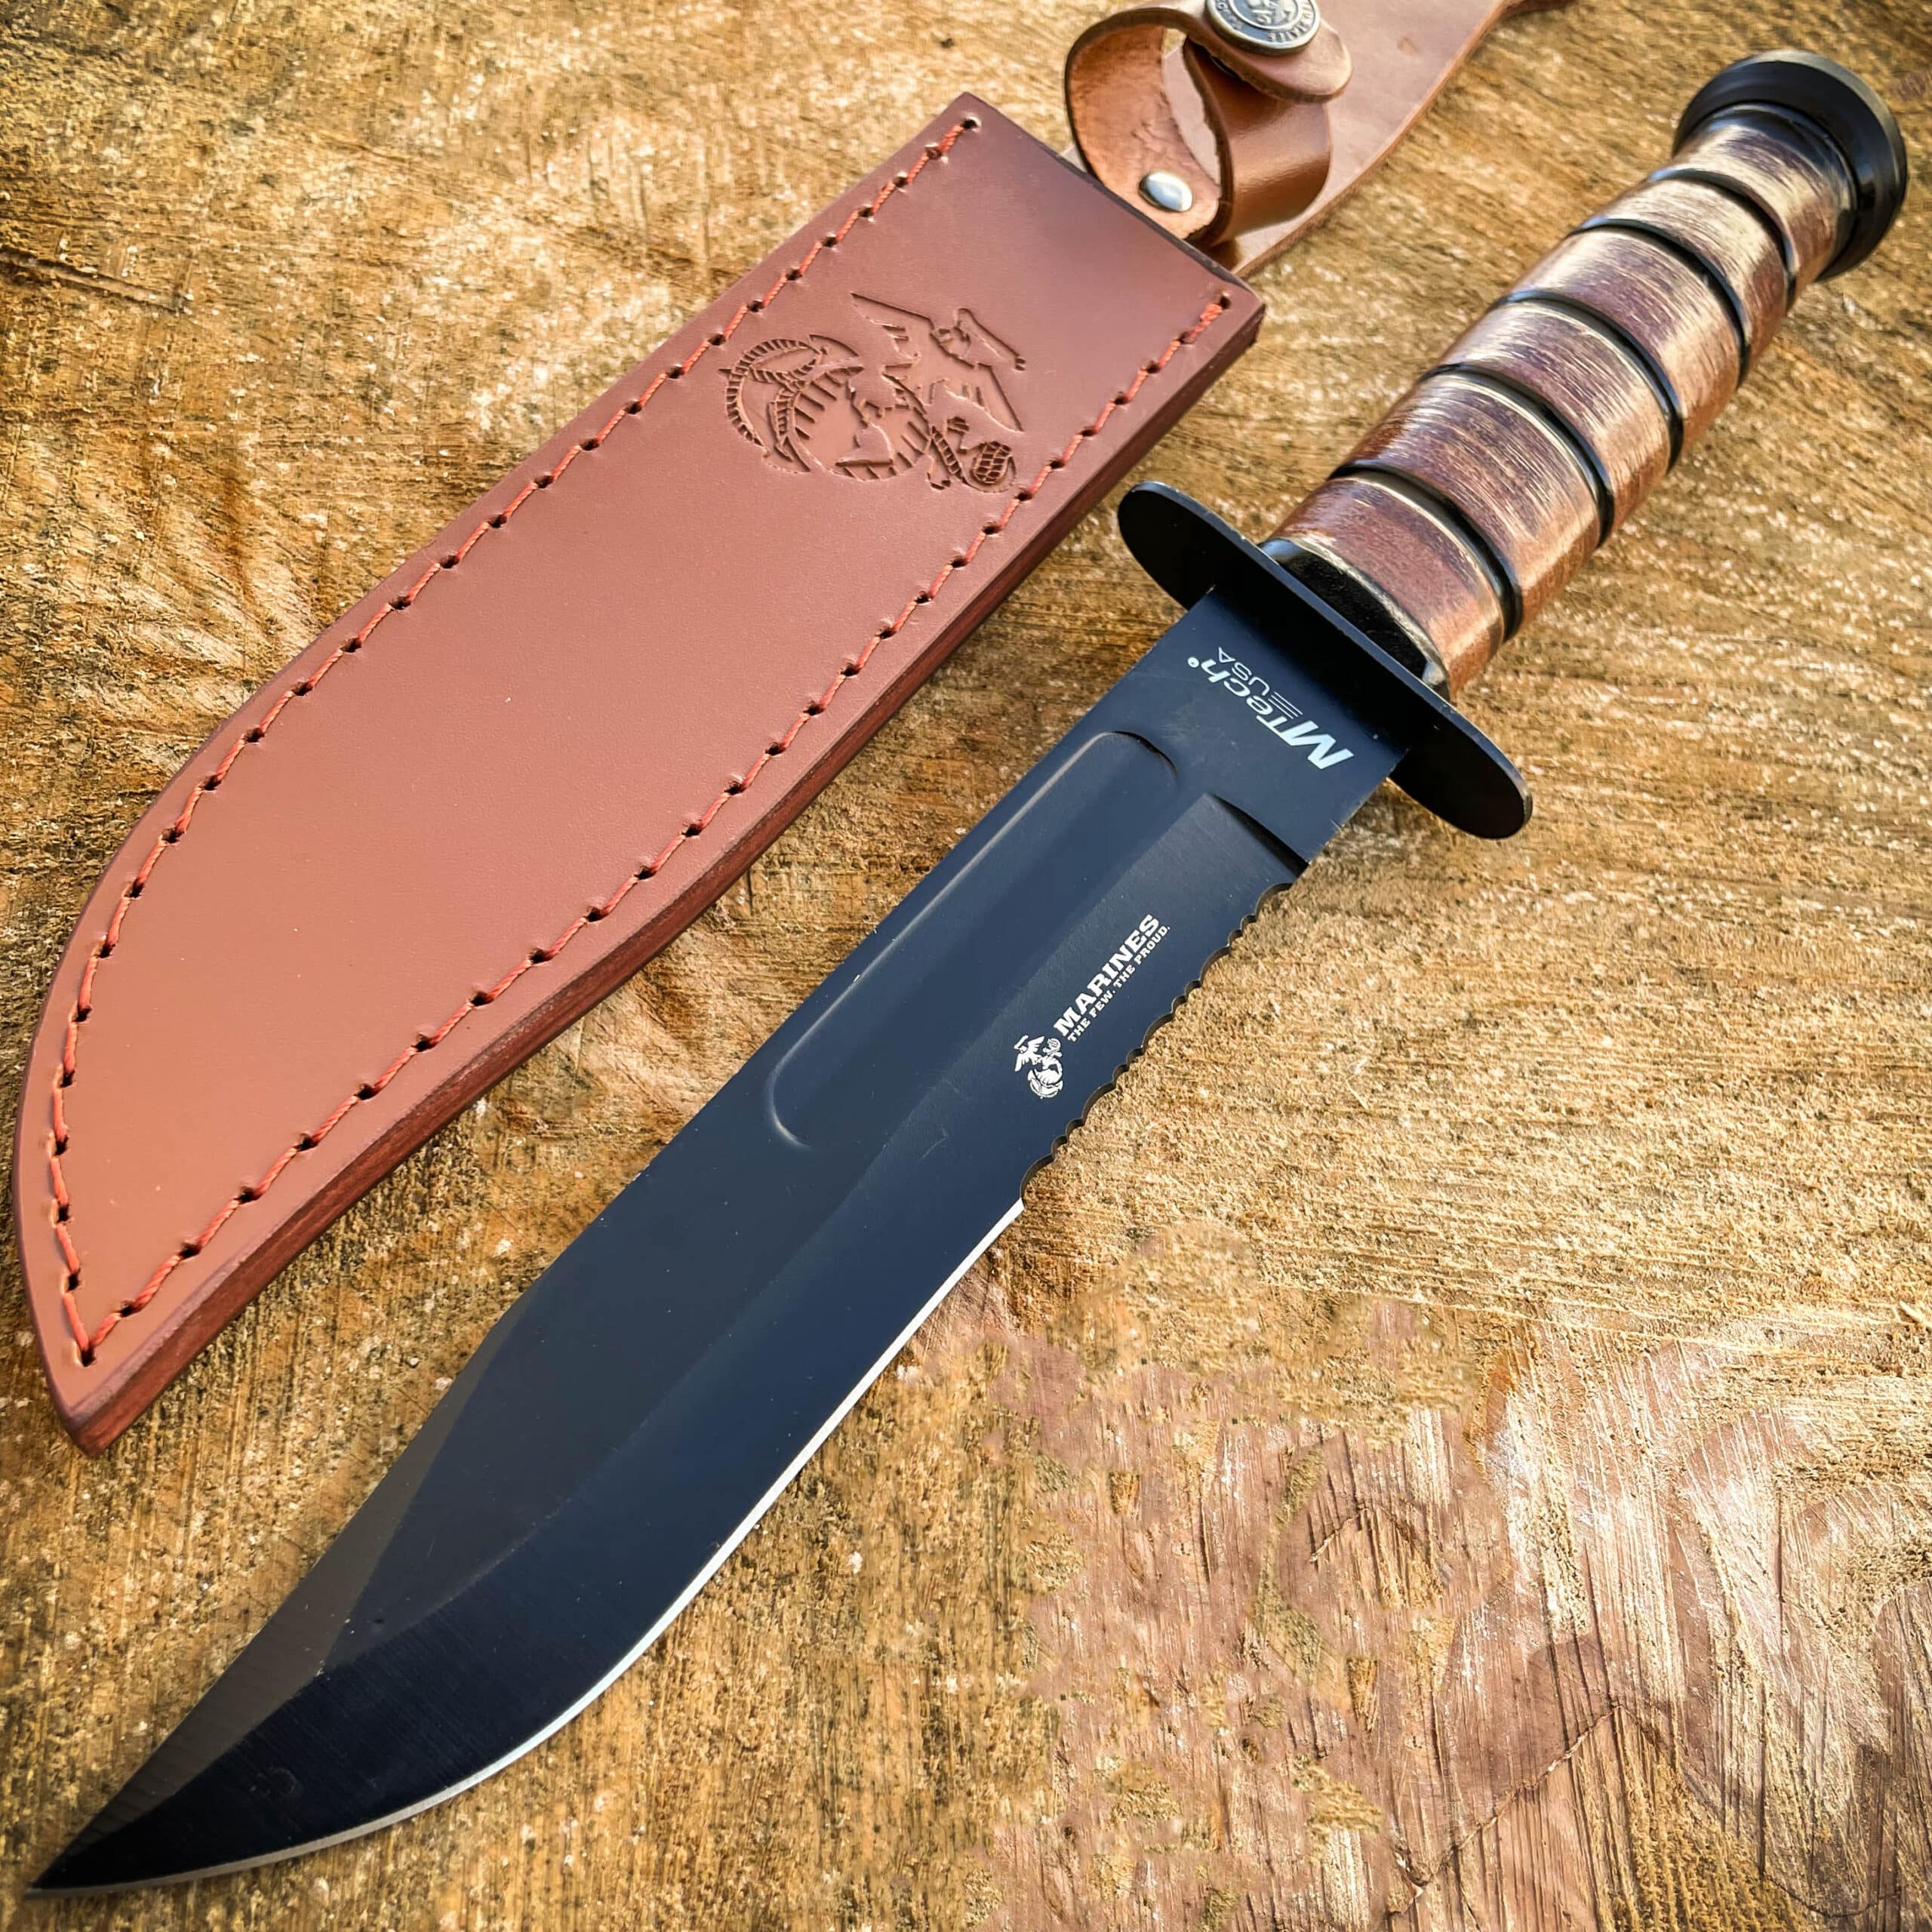 USMC COMBAT FIGHTER KNIFE – FIXED BLADE WITH LEATHER SHEATH